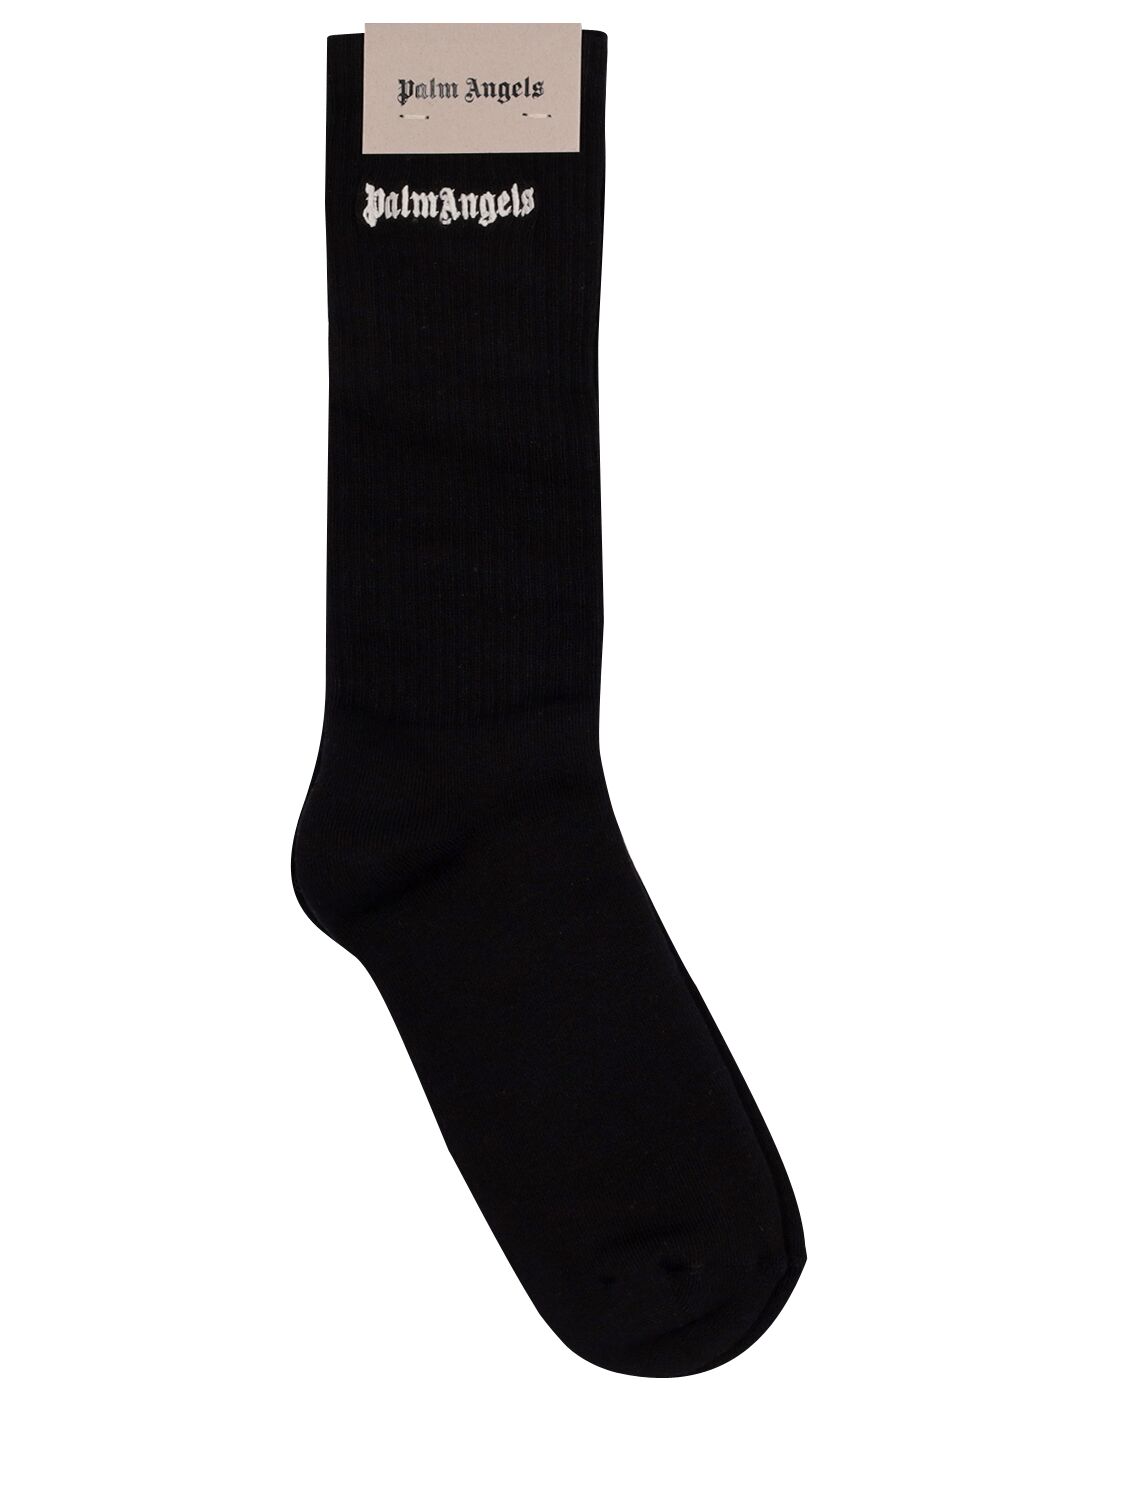 Palm Angels Embroidered Cotton Blend Socks In Black